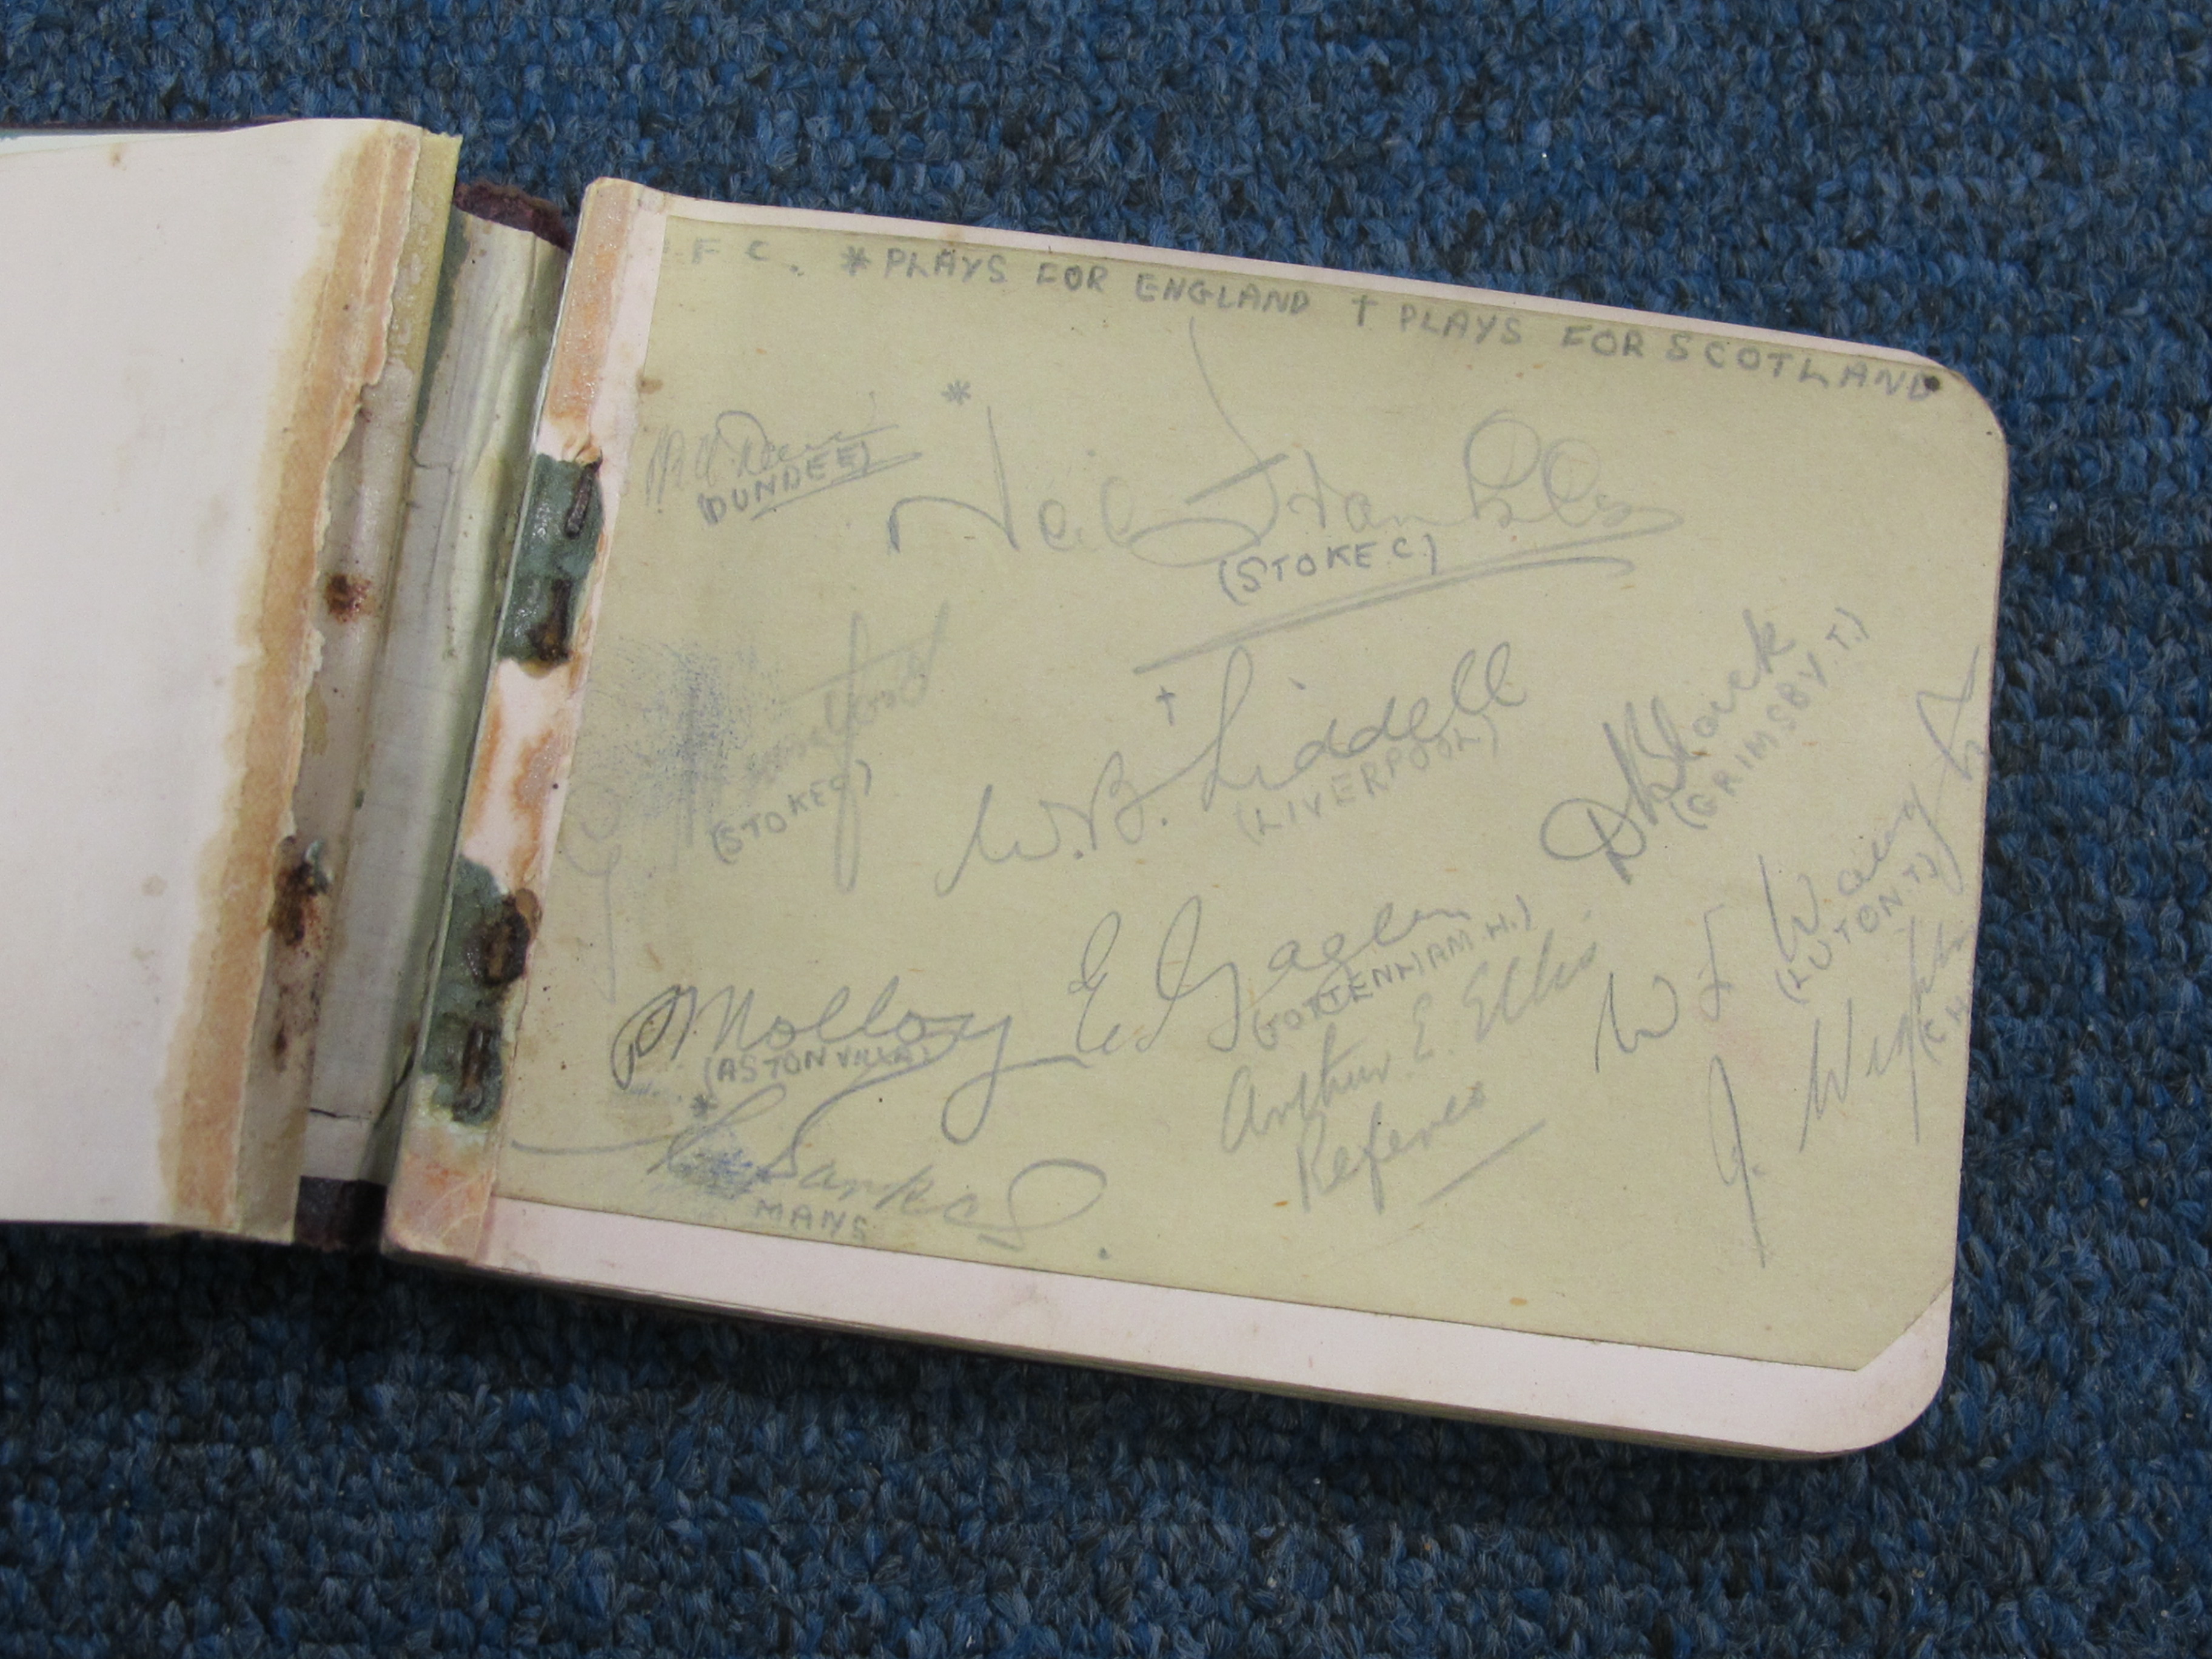 Autograph book c1948/49 variously signed by Cricketers Footballers Horse Racing etc, noted Notts